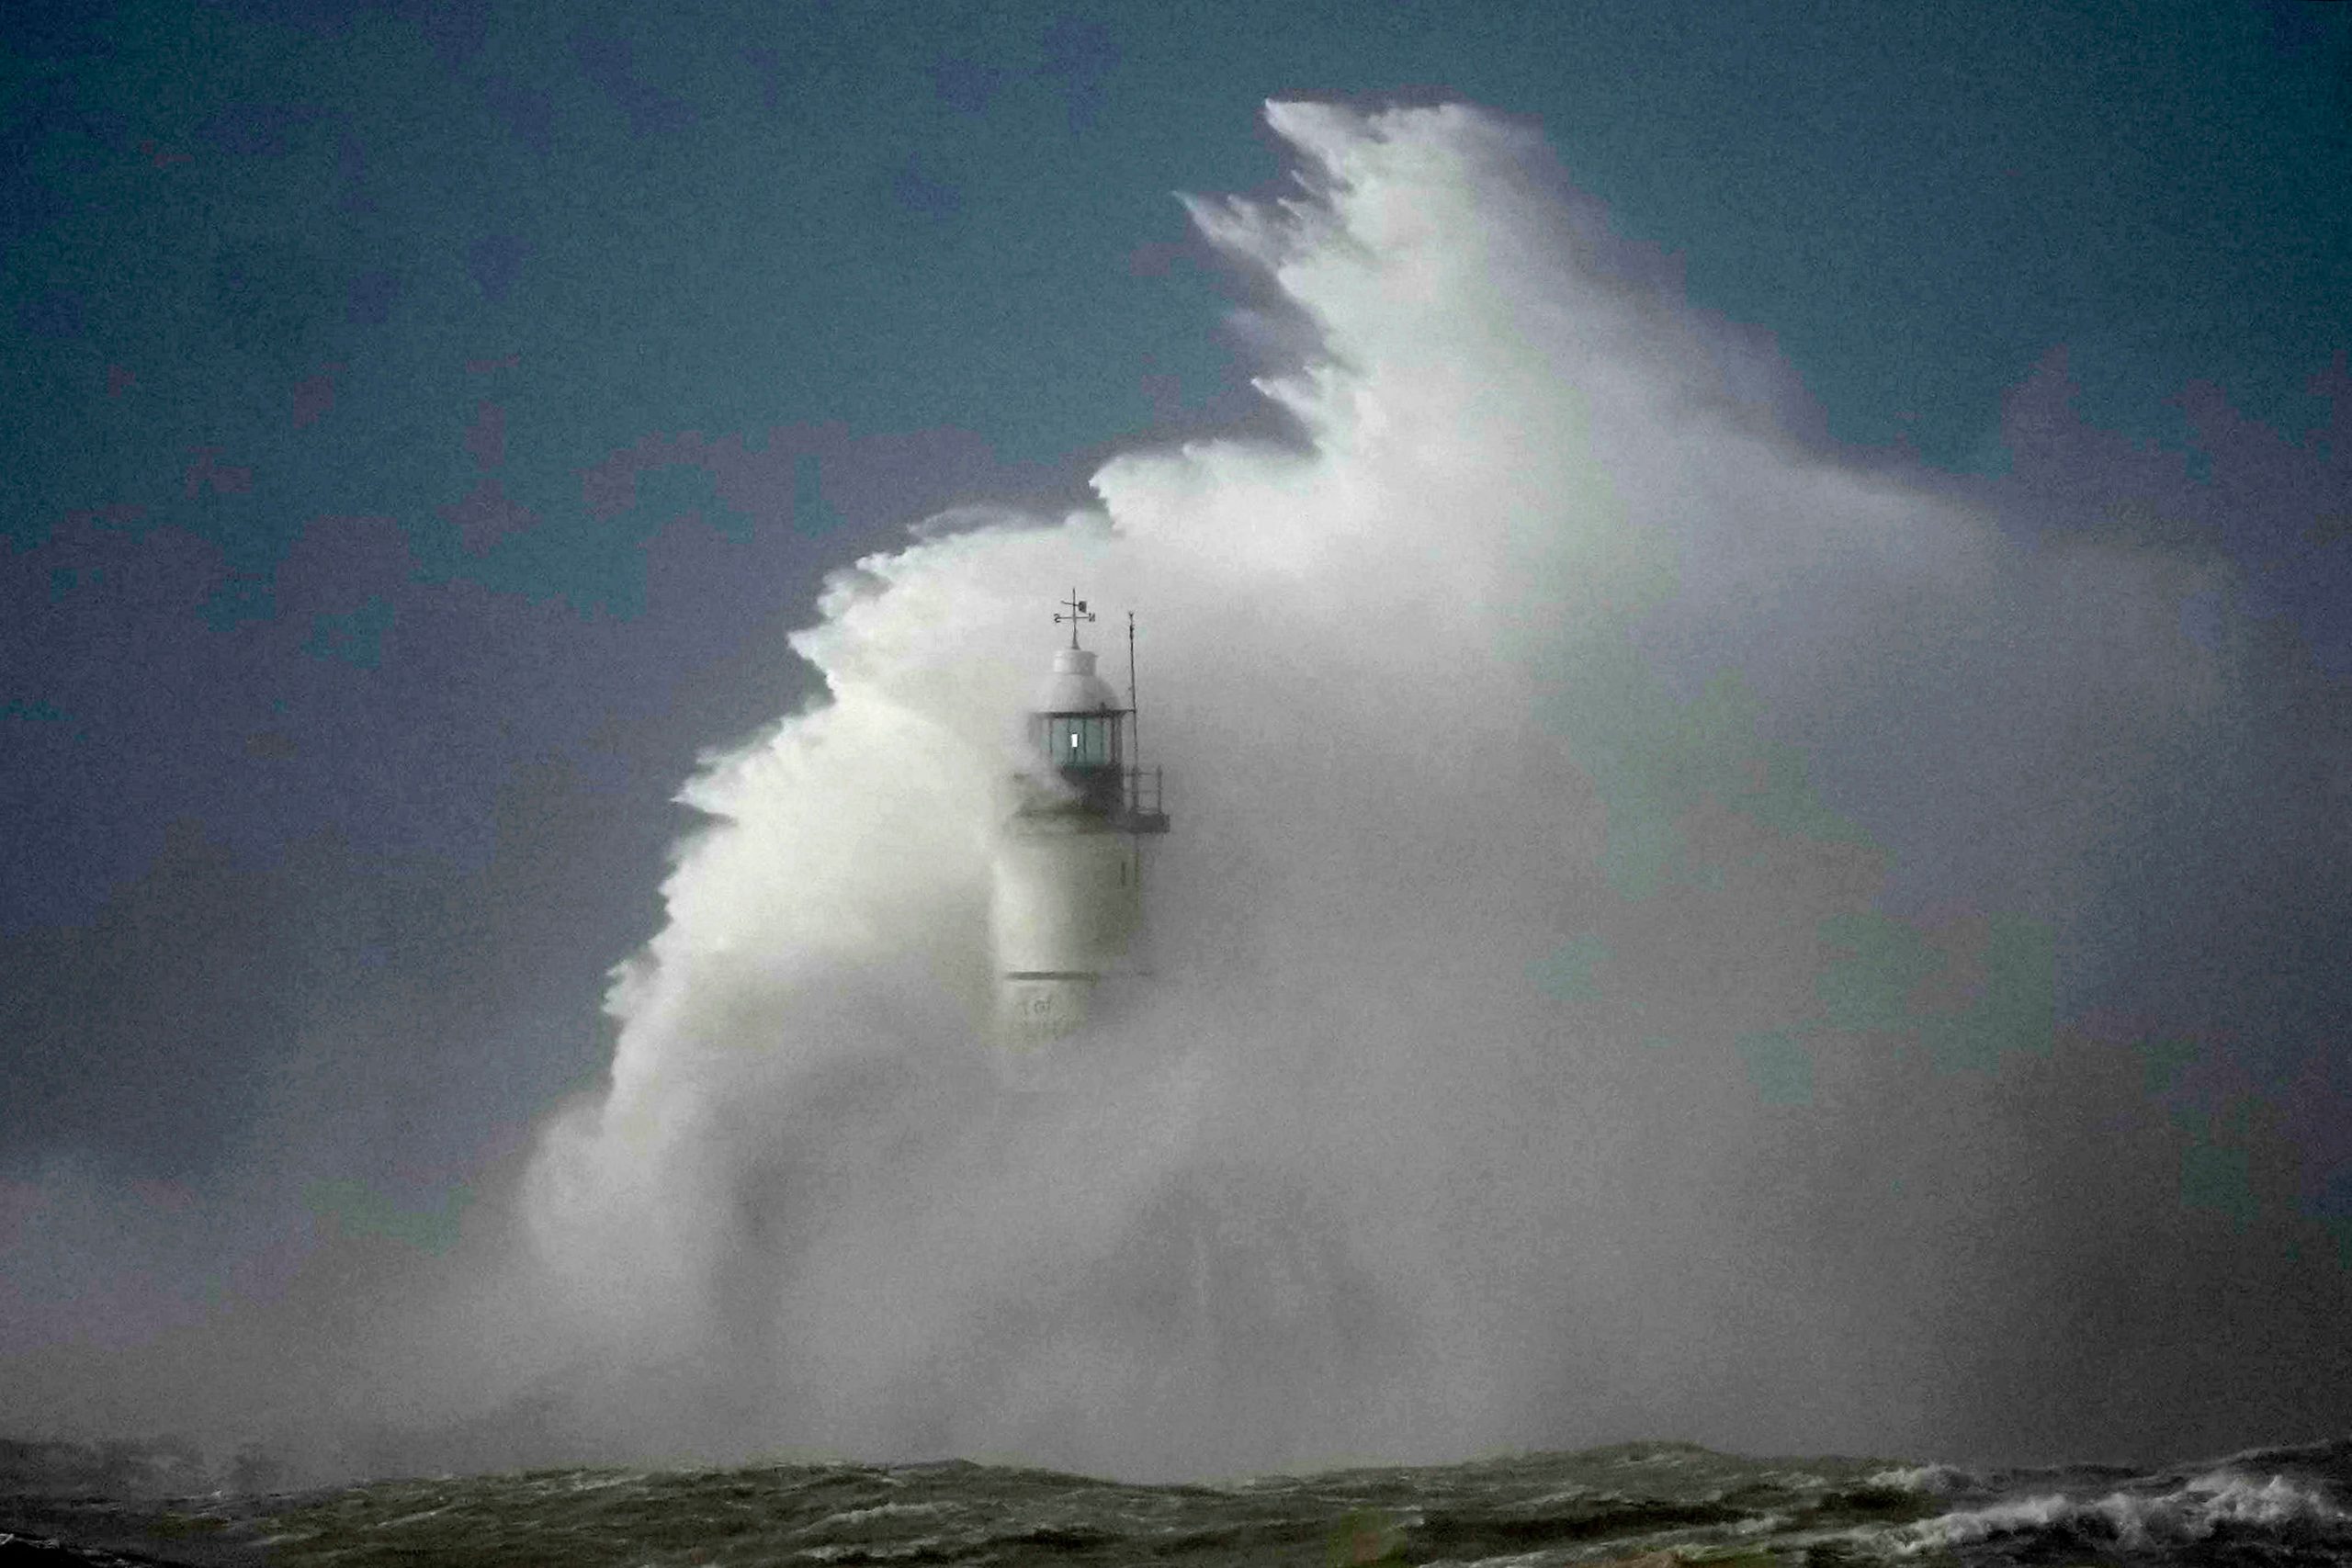 Storm Eunice brings record winds to UK, London under red alert